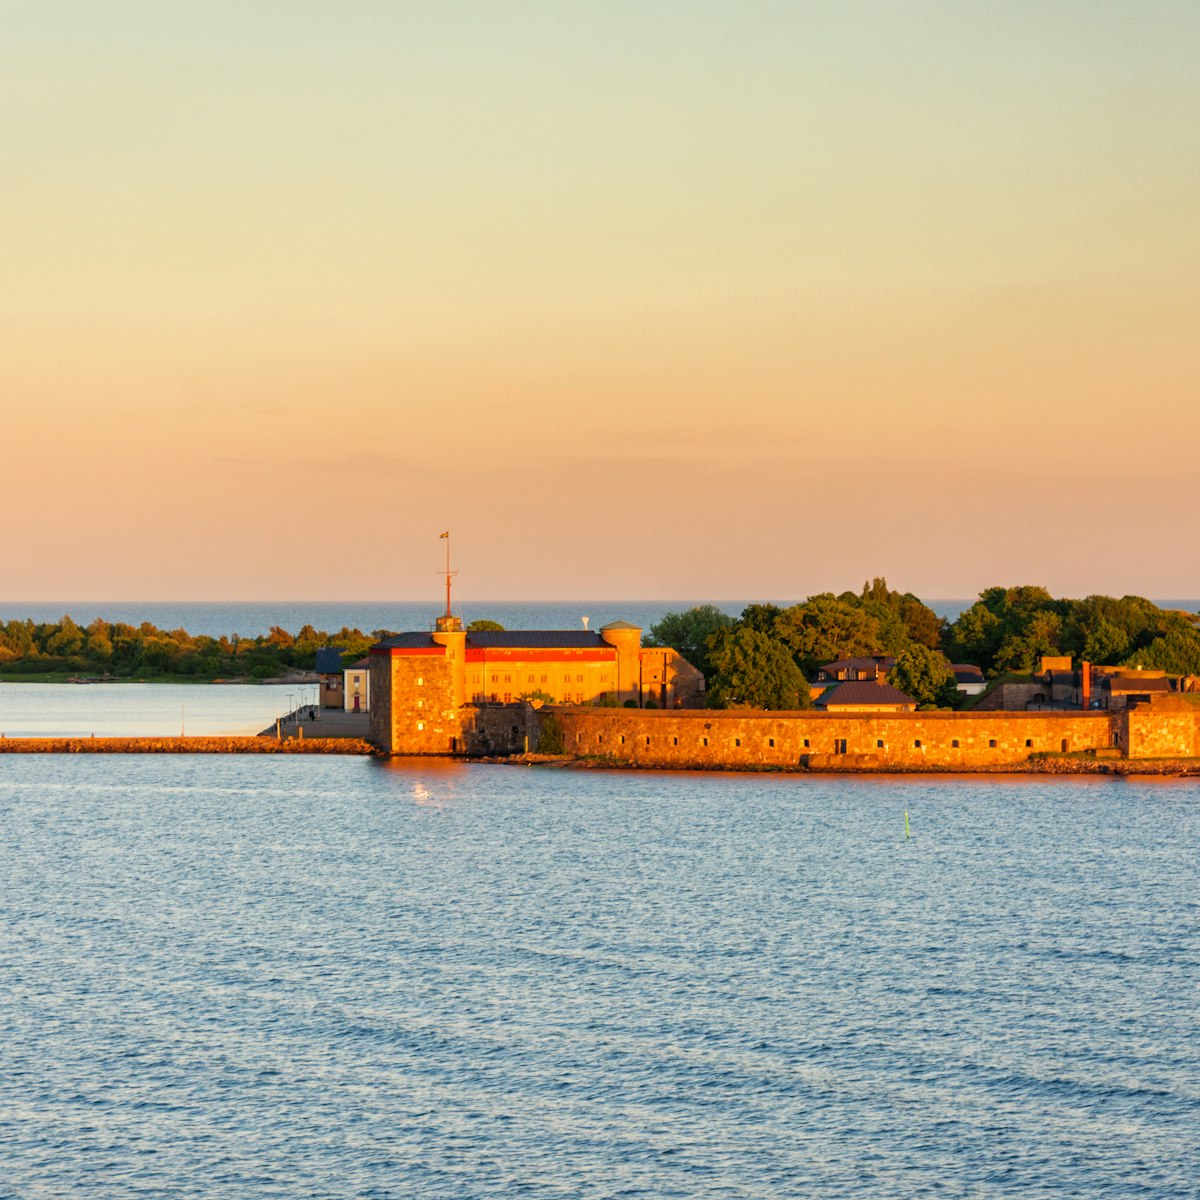 View of Kungsholms Fort.